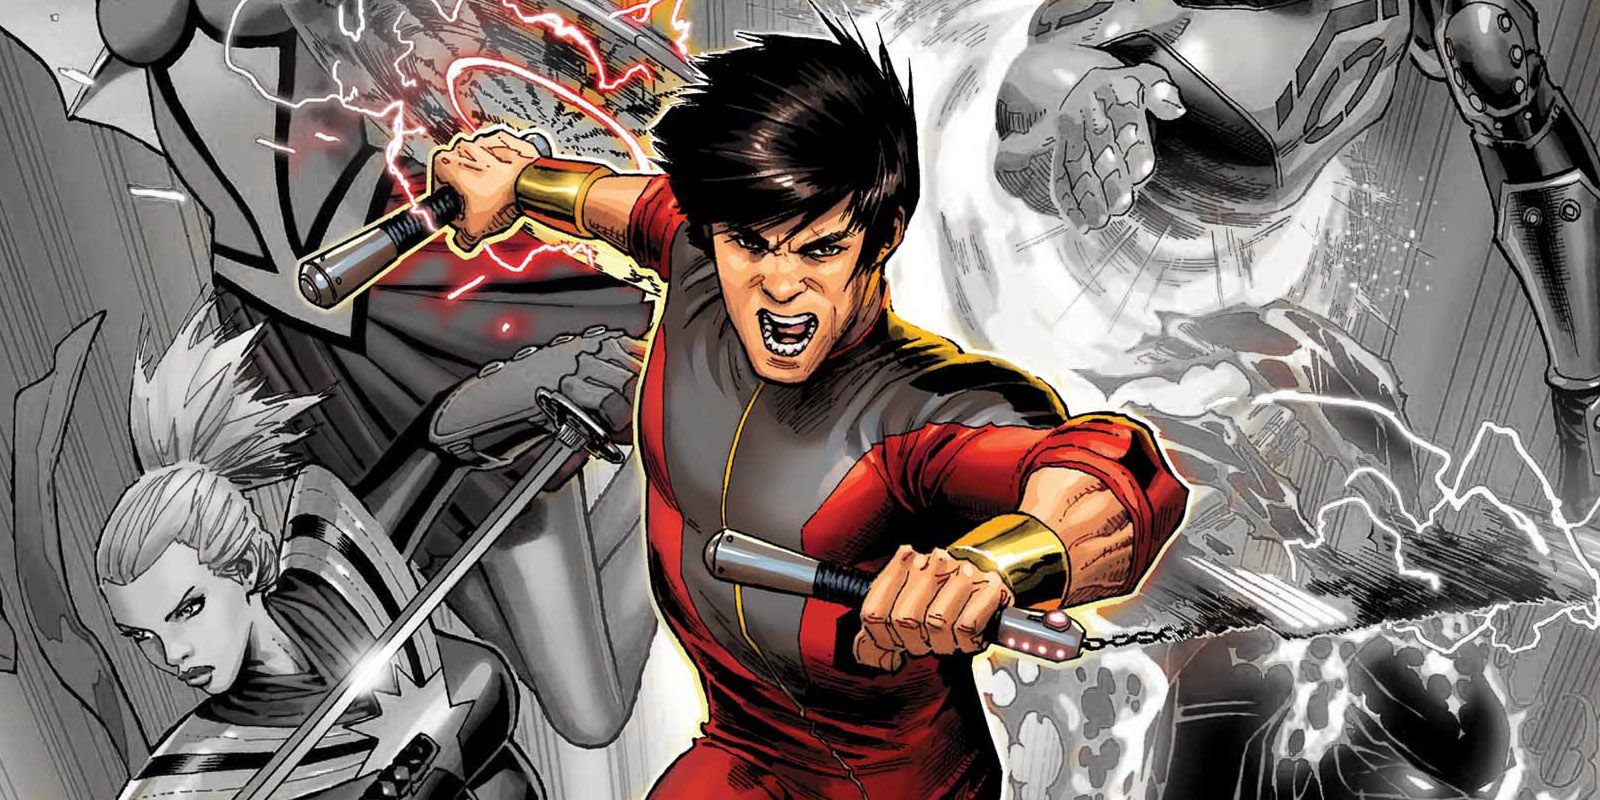 New Shang Chi Comic Book From Marvel to Explore the Origin of the